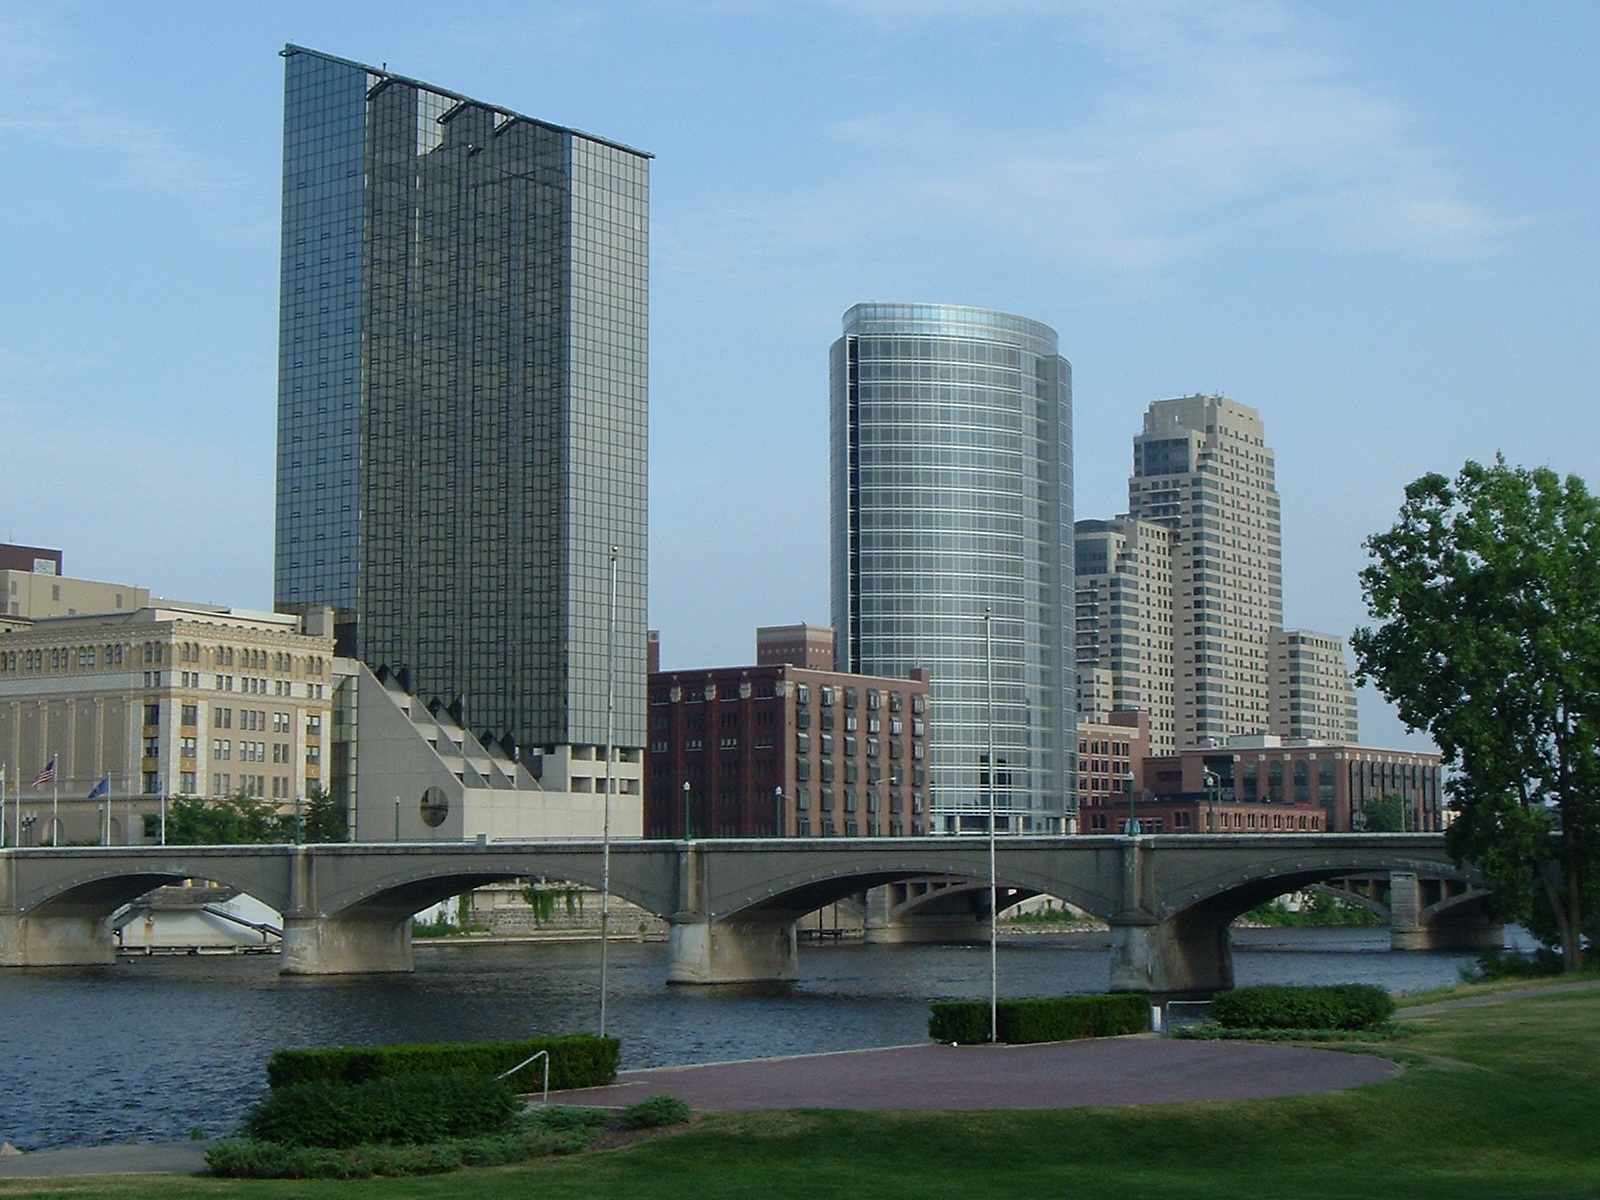 Photograph of skyscrapers along a river.